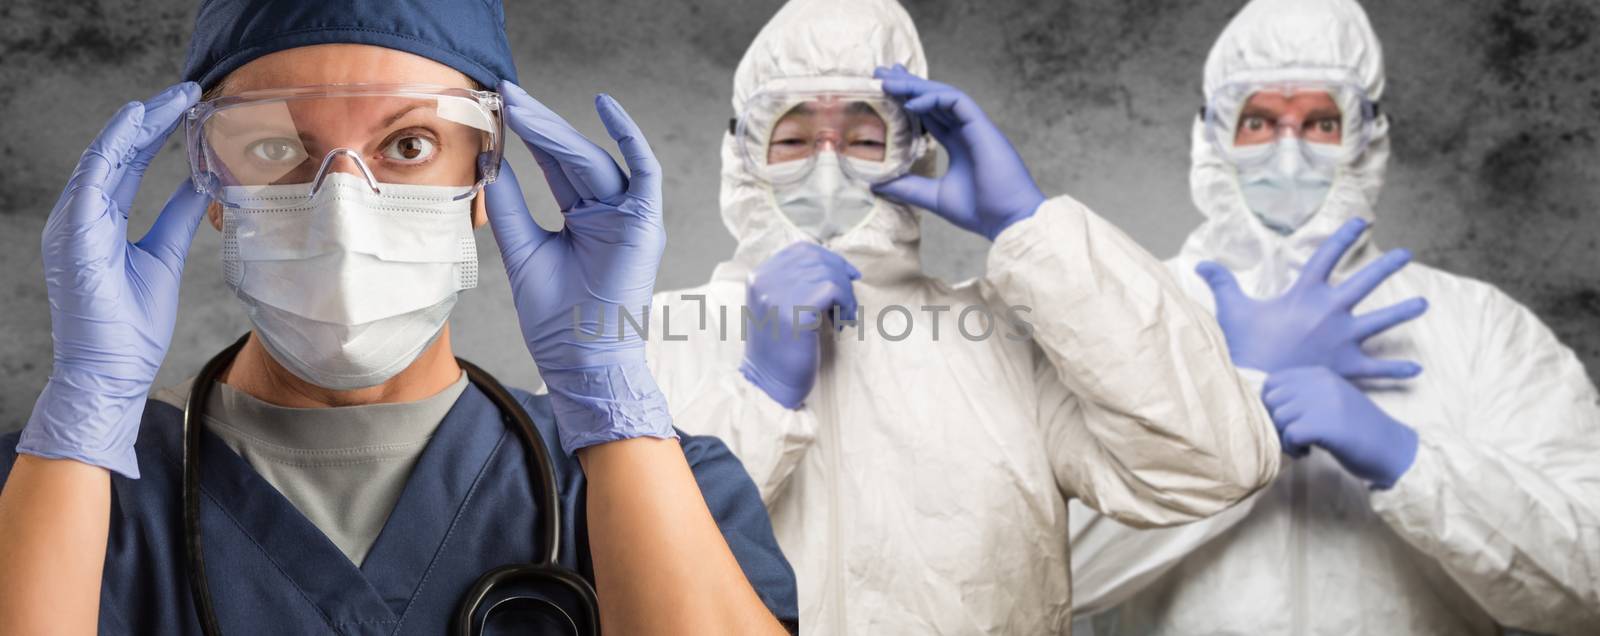 Caucasian Woman, Man and Chinese Man In Masks, Goggles and Hazmat Suites.